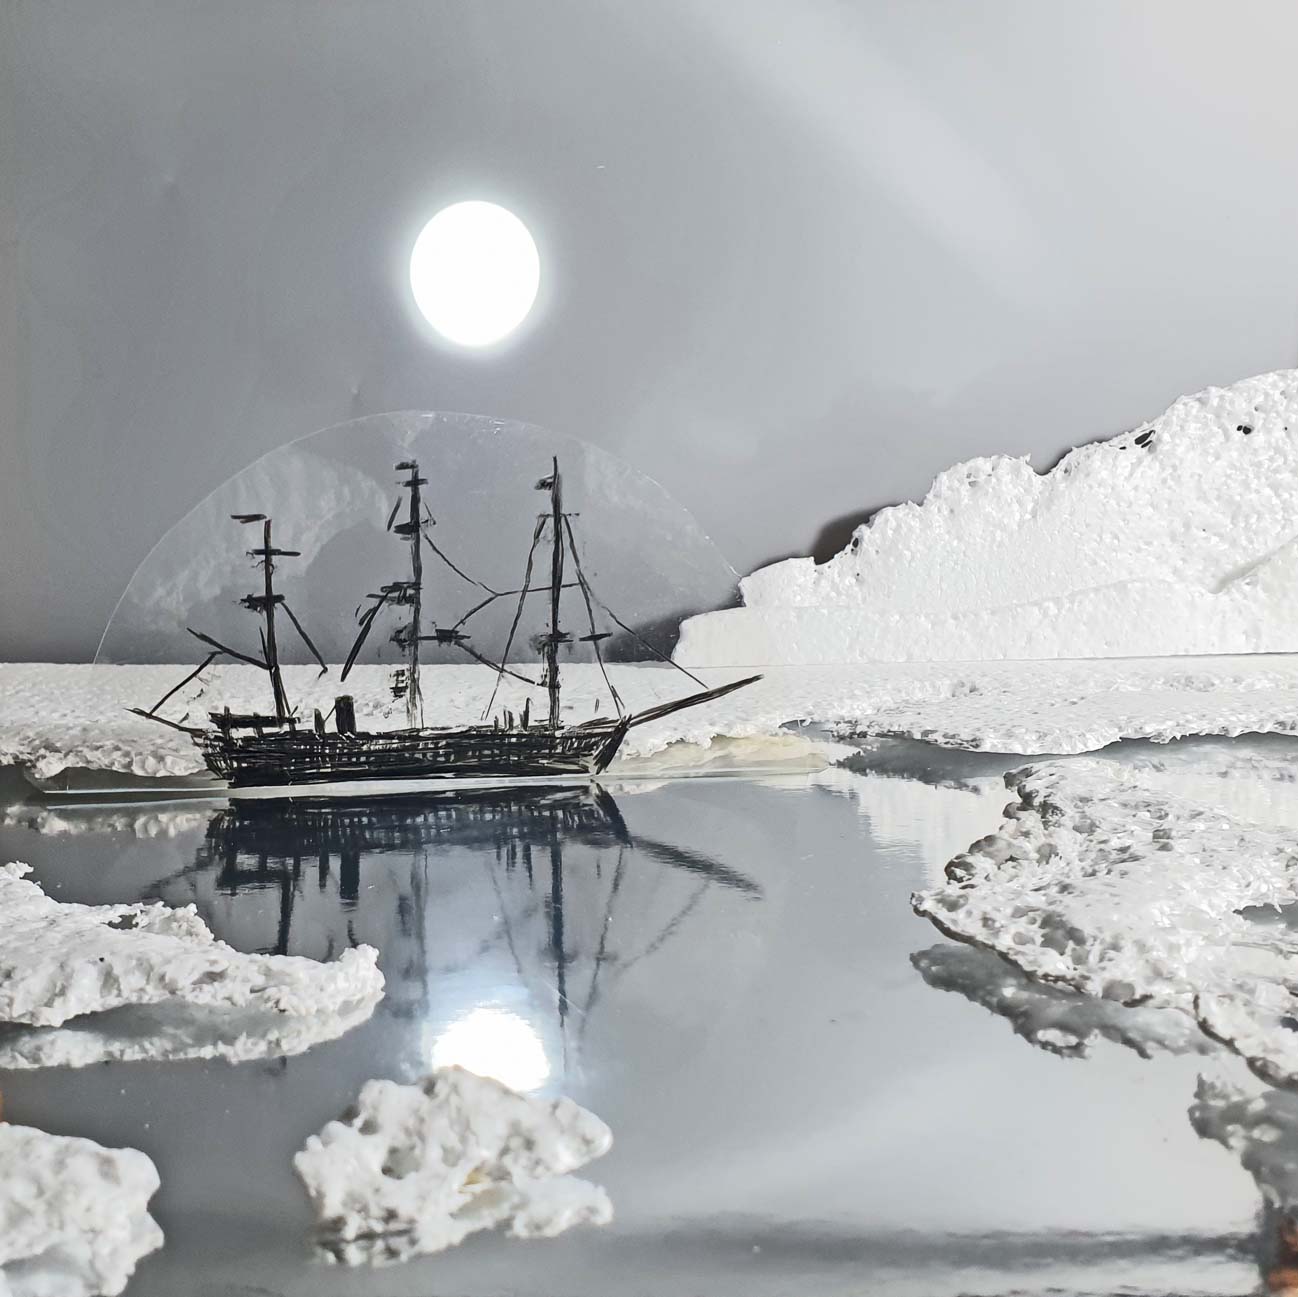 Glowing white moon imgae appears above a drawing of an old fashioned whaling ship reflected in a mirrored surface with icebergs and snow made of packaging